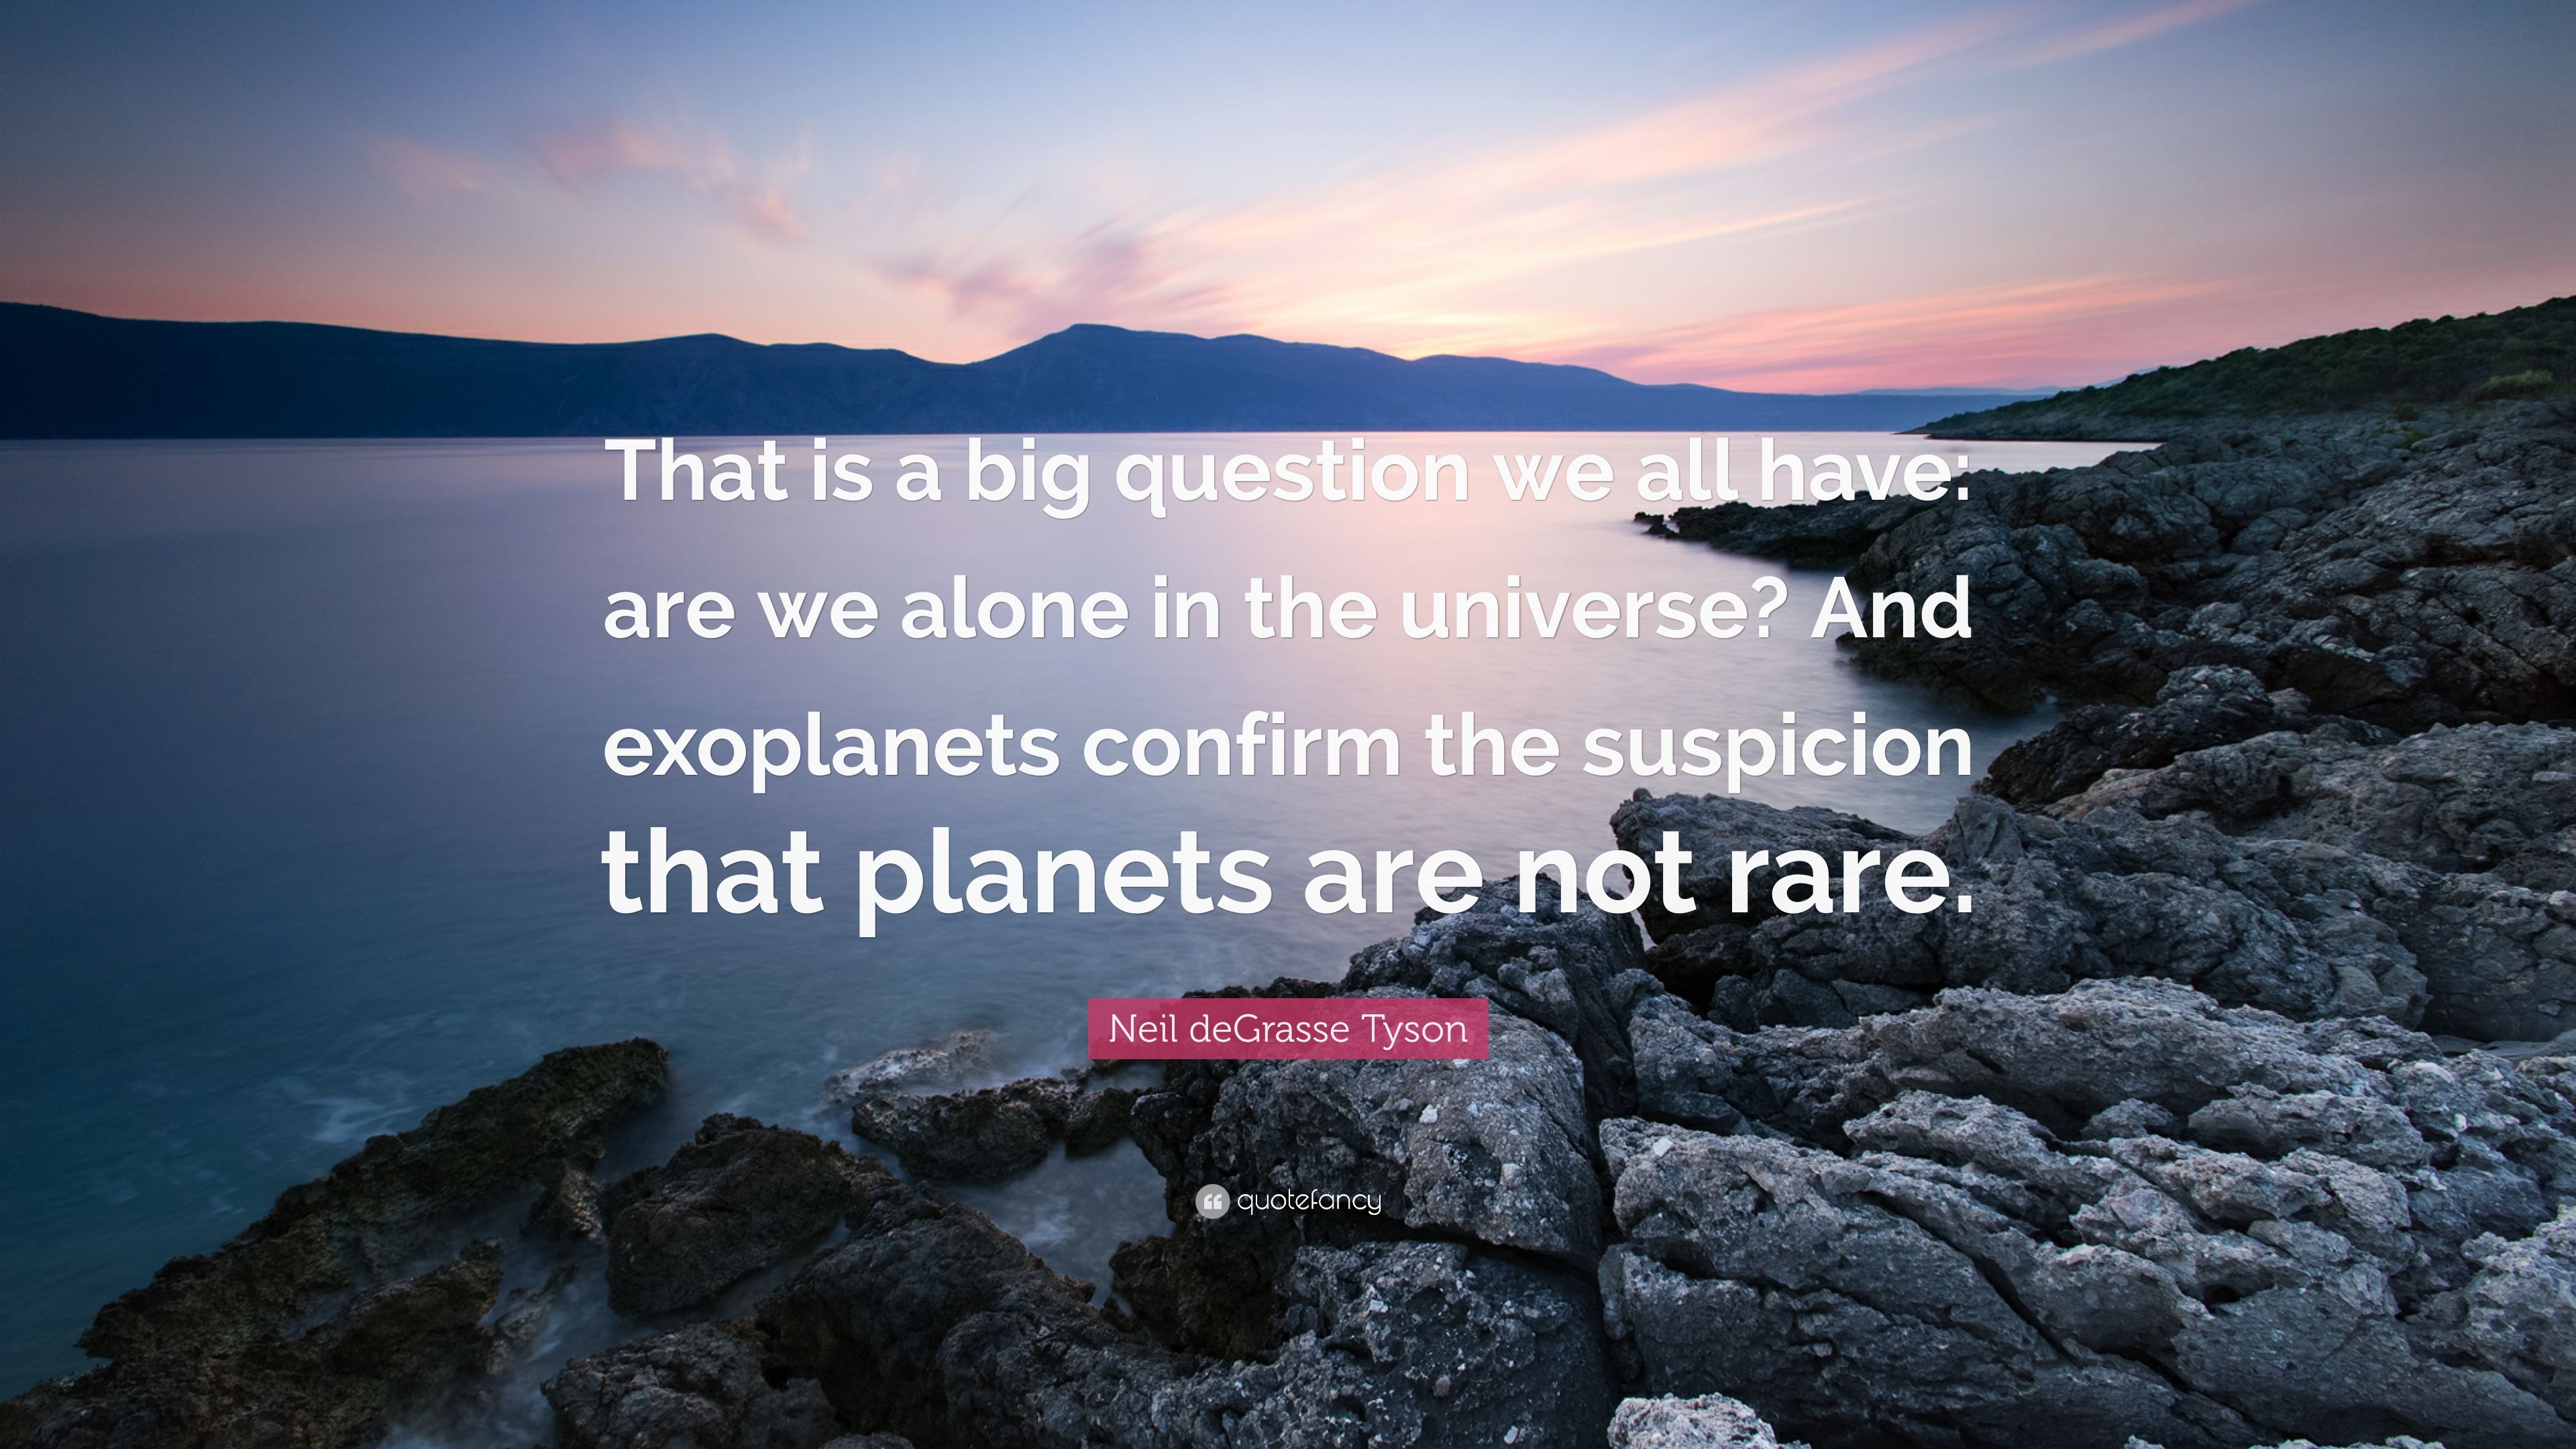 Neil deGrasse Tyson Quote: “That is a big question we all have